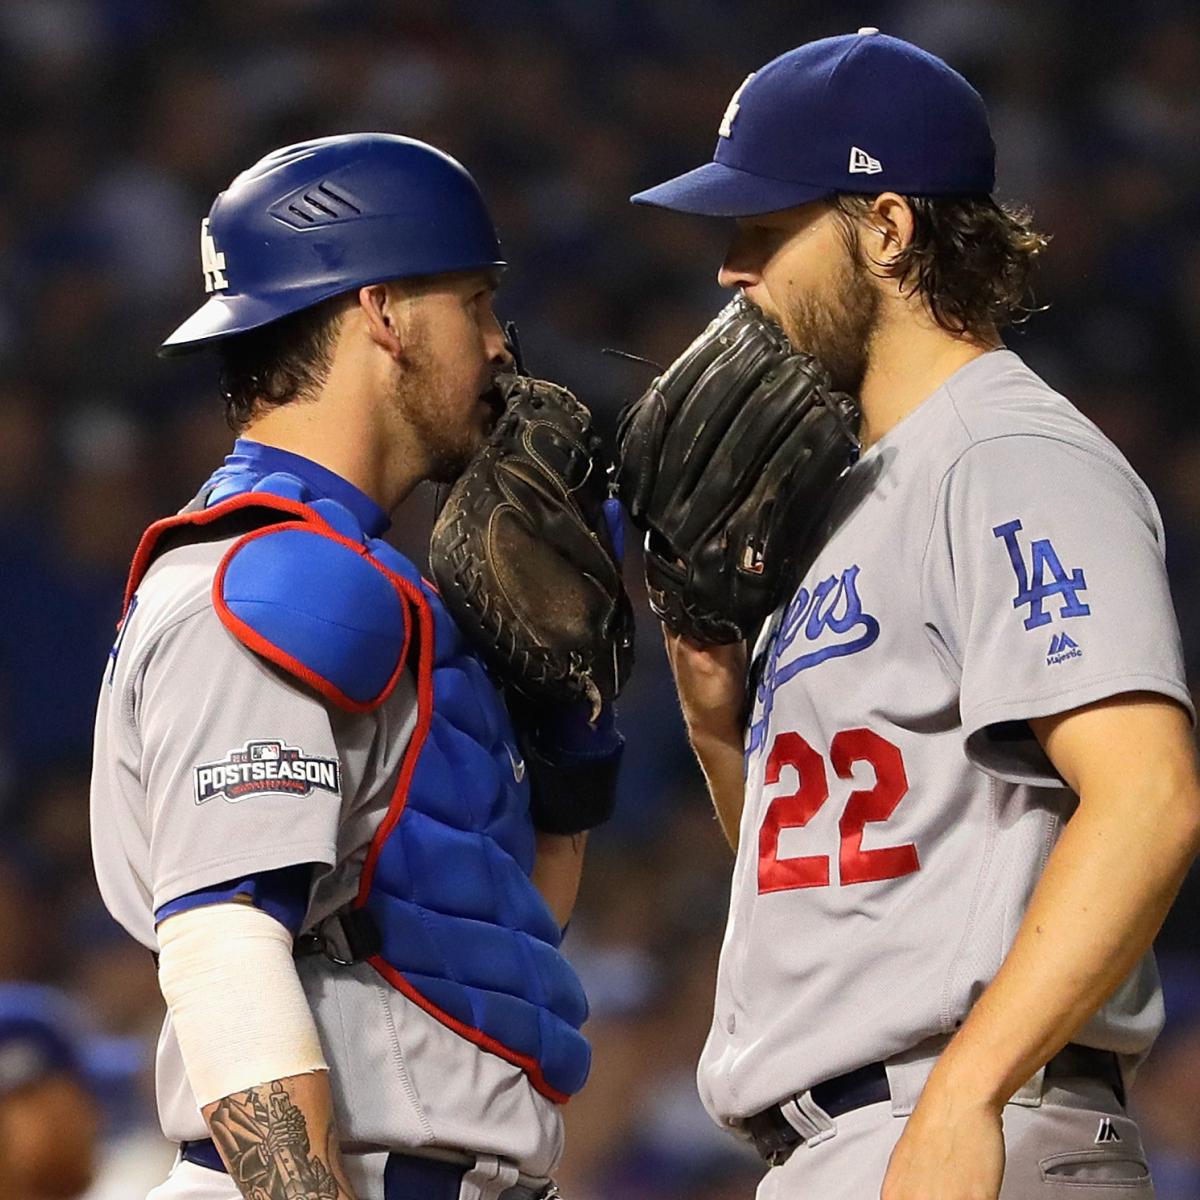 Clayton Kershaw's Playoff Redemption Tour Rolls on with Signature